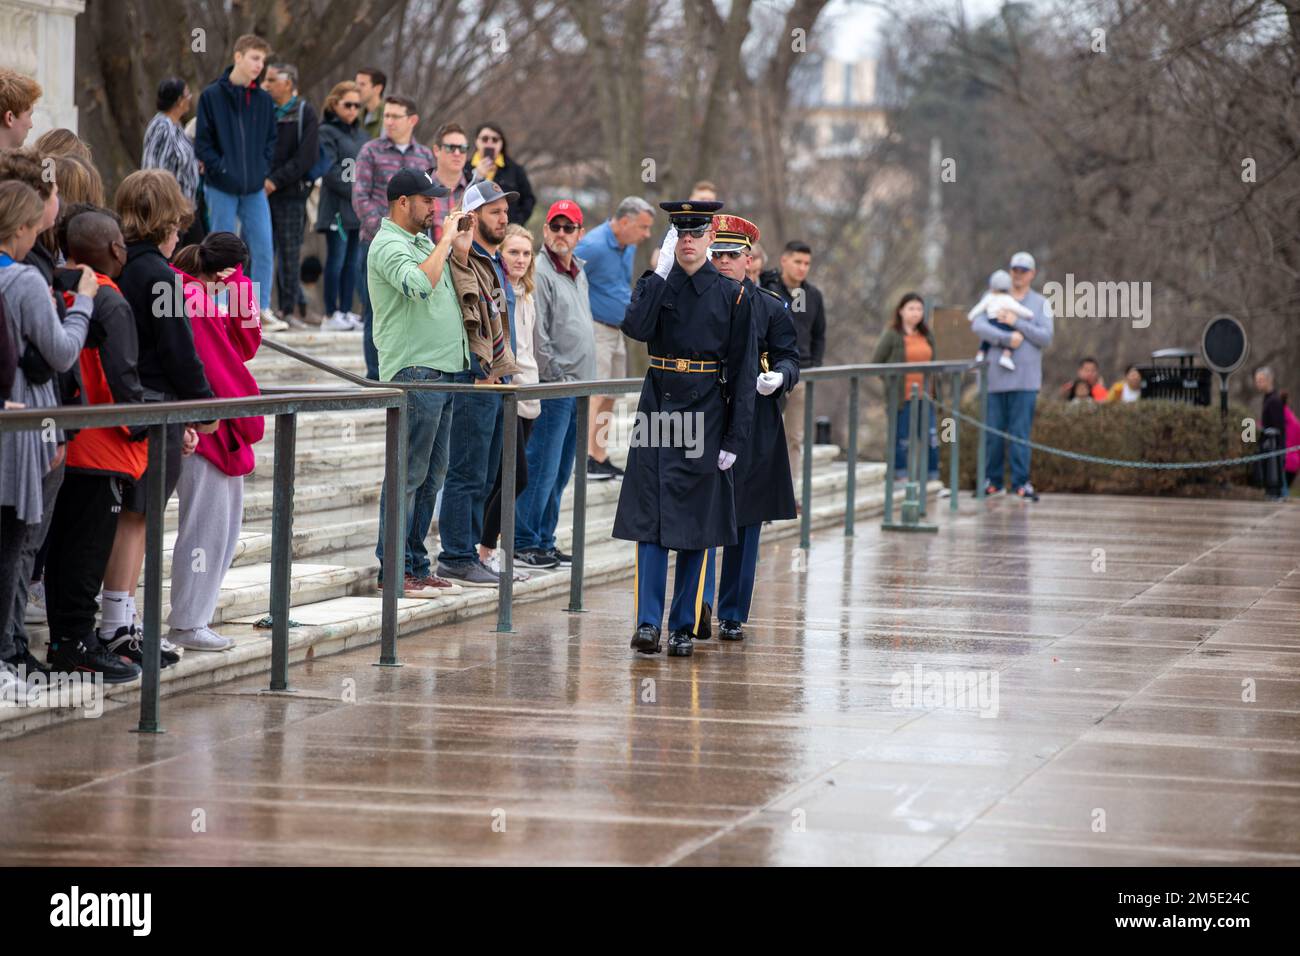 U.S. Army Honor Guard, 3rd Infantry Division, conduct a ceremonial wreath laying at the Tomb of the Unknown Soldier in Arlington, Virginia, Mar. 6, 2022. U.S. Army Soldiers from the Vermont National Guard traveled to the Arlington National Cemetery to pay respects. Stock Photo